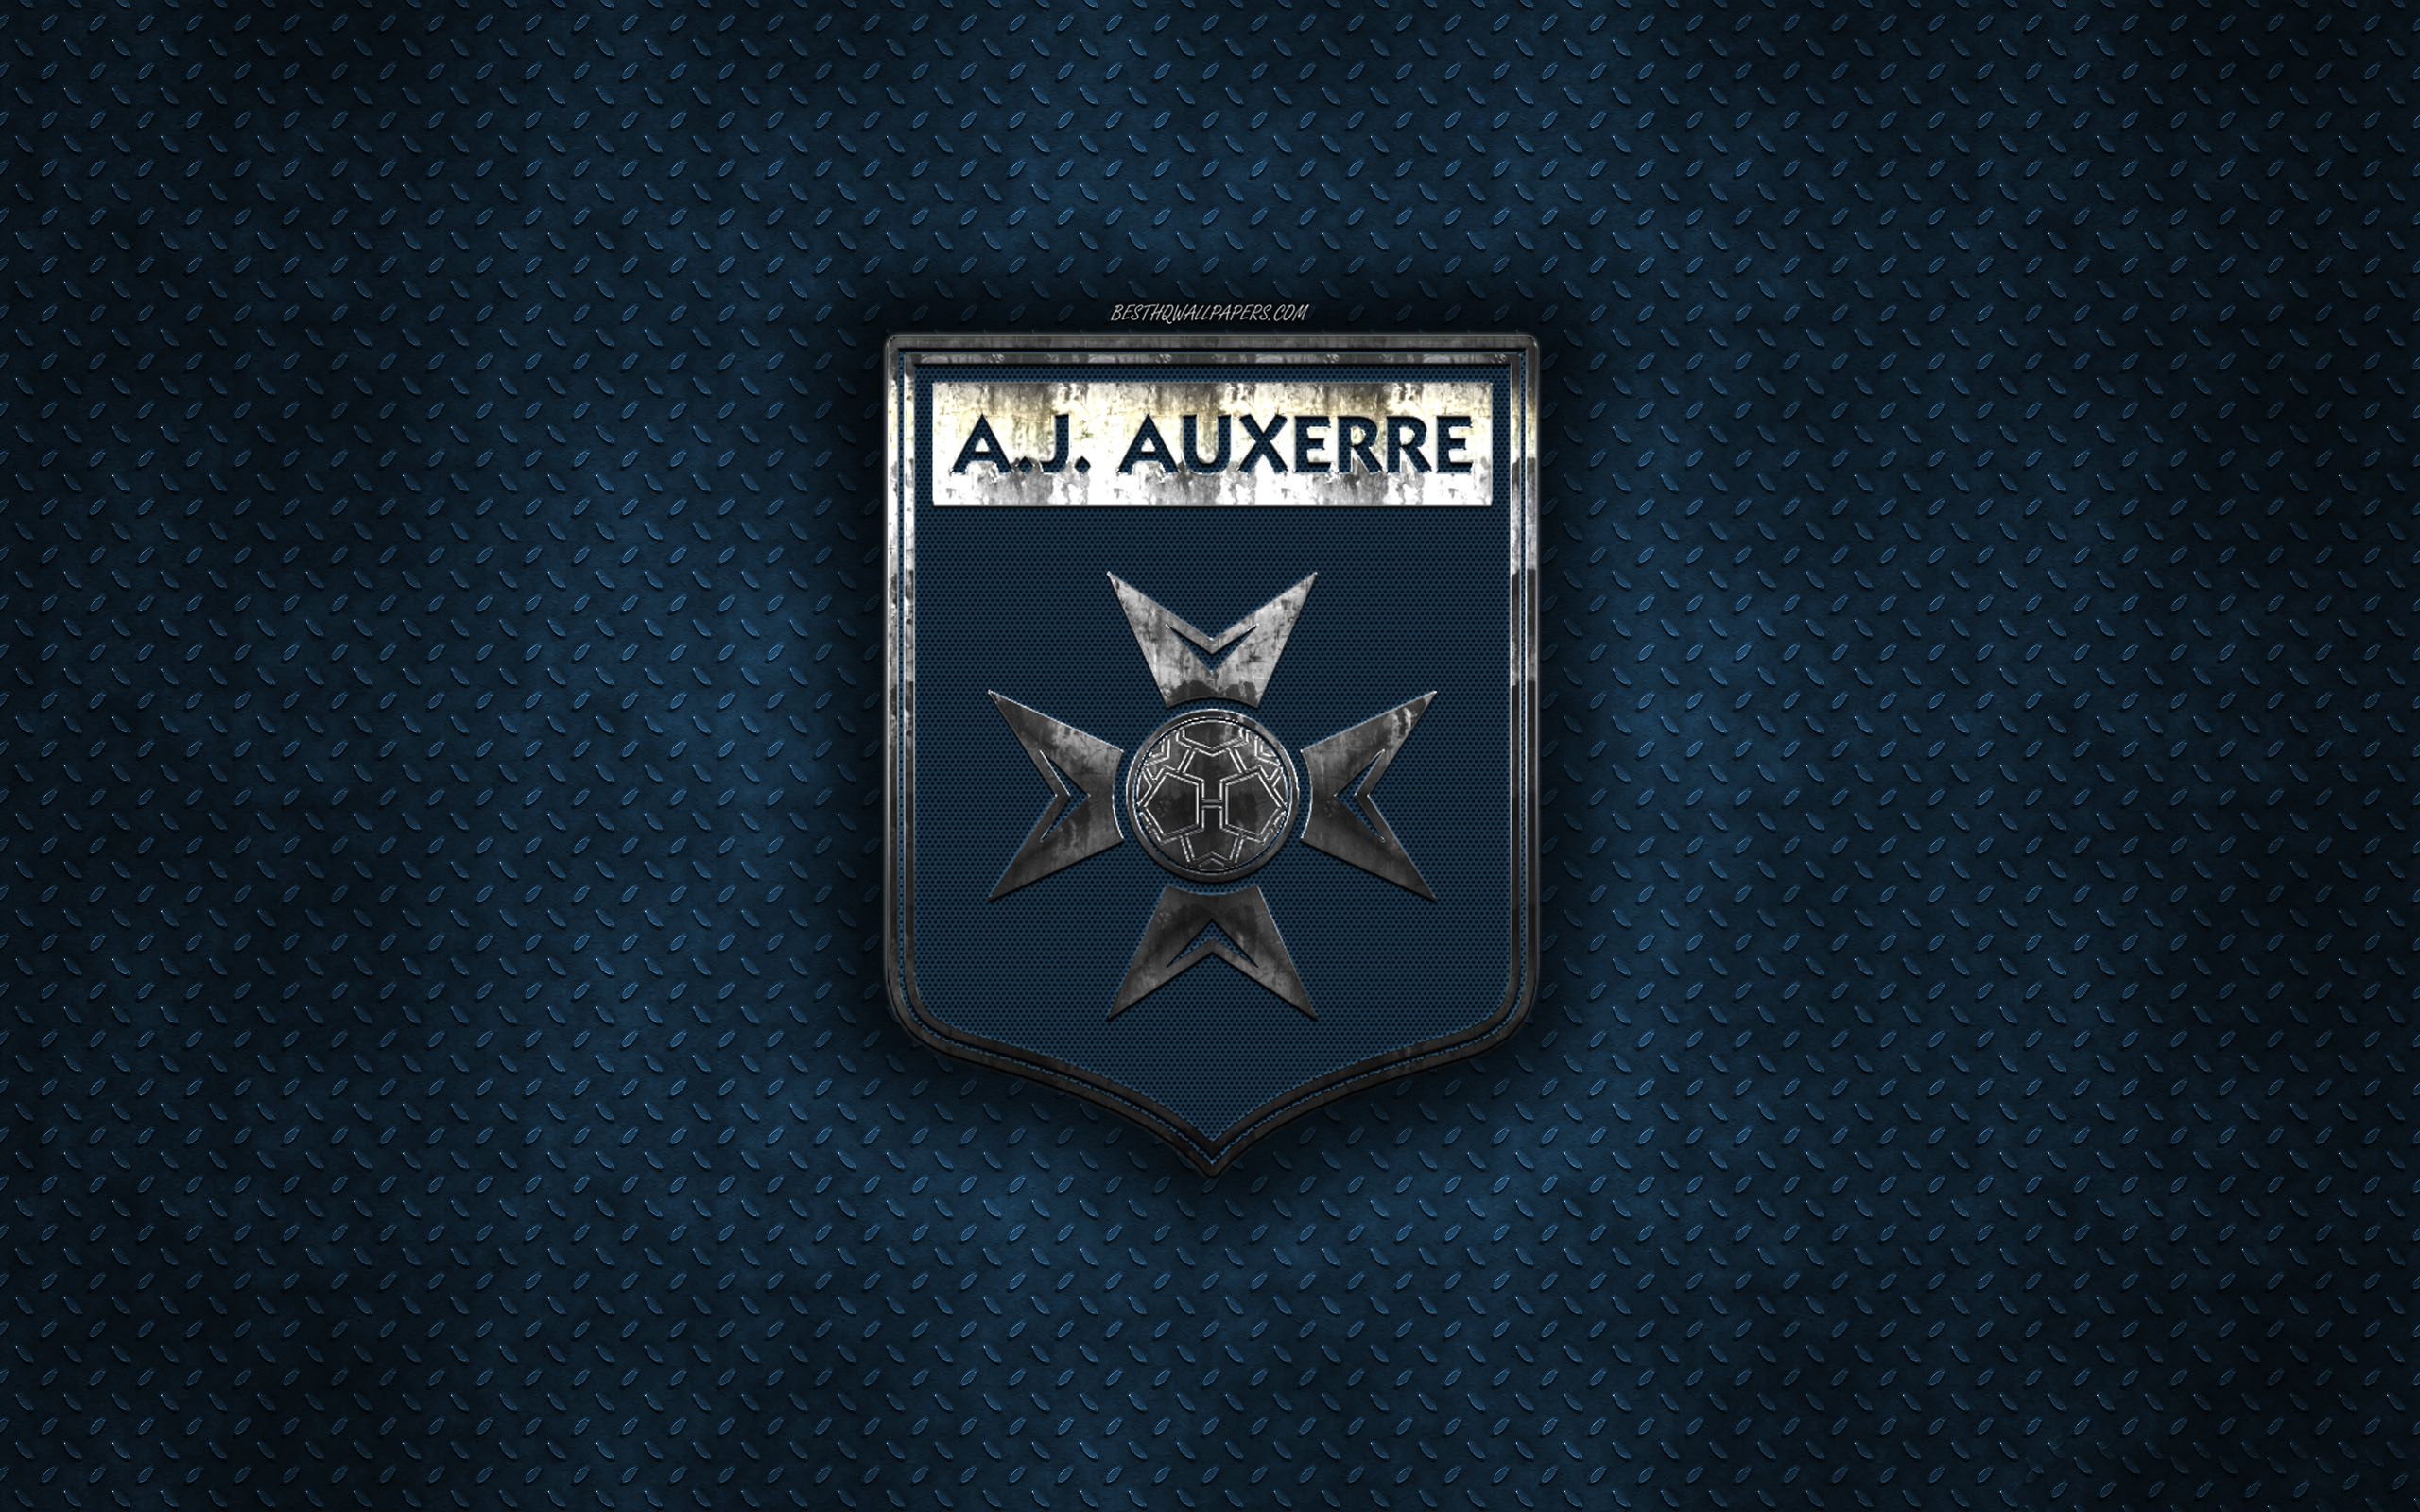 Download wallpaper AJ Auxerre, French football club, blue metal texture, metal logo, emblem, Auxerre, France, Ligue creative art, football for desktop with resolution 2560x1600. High Quality HD picture wallpaper